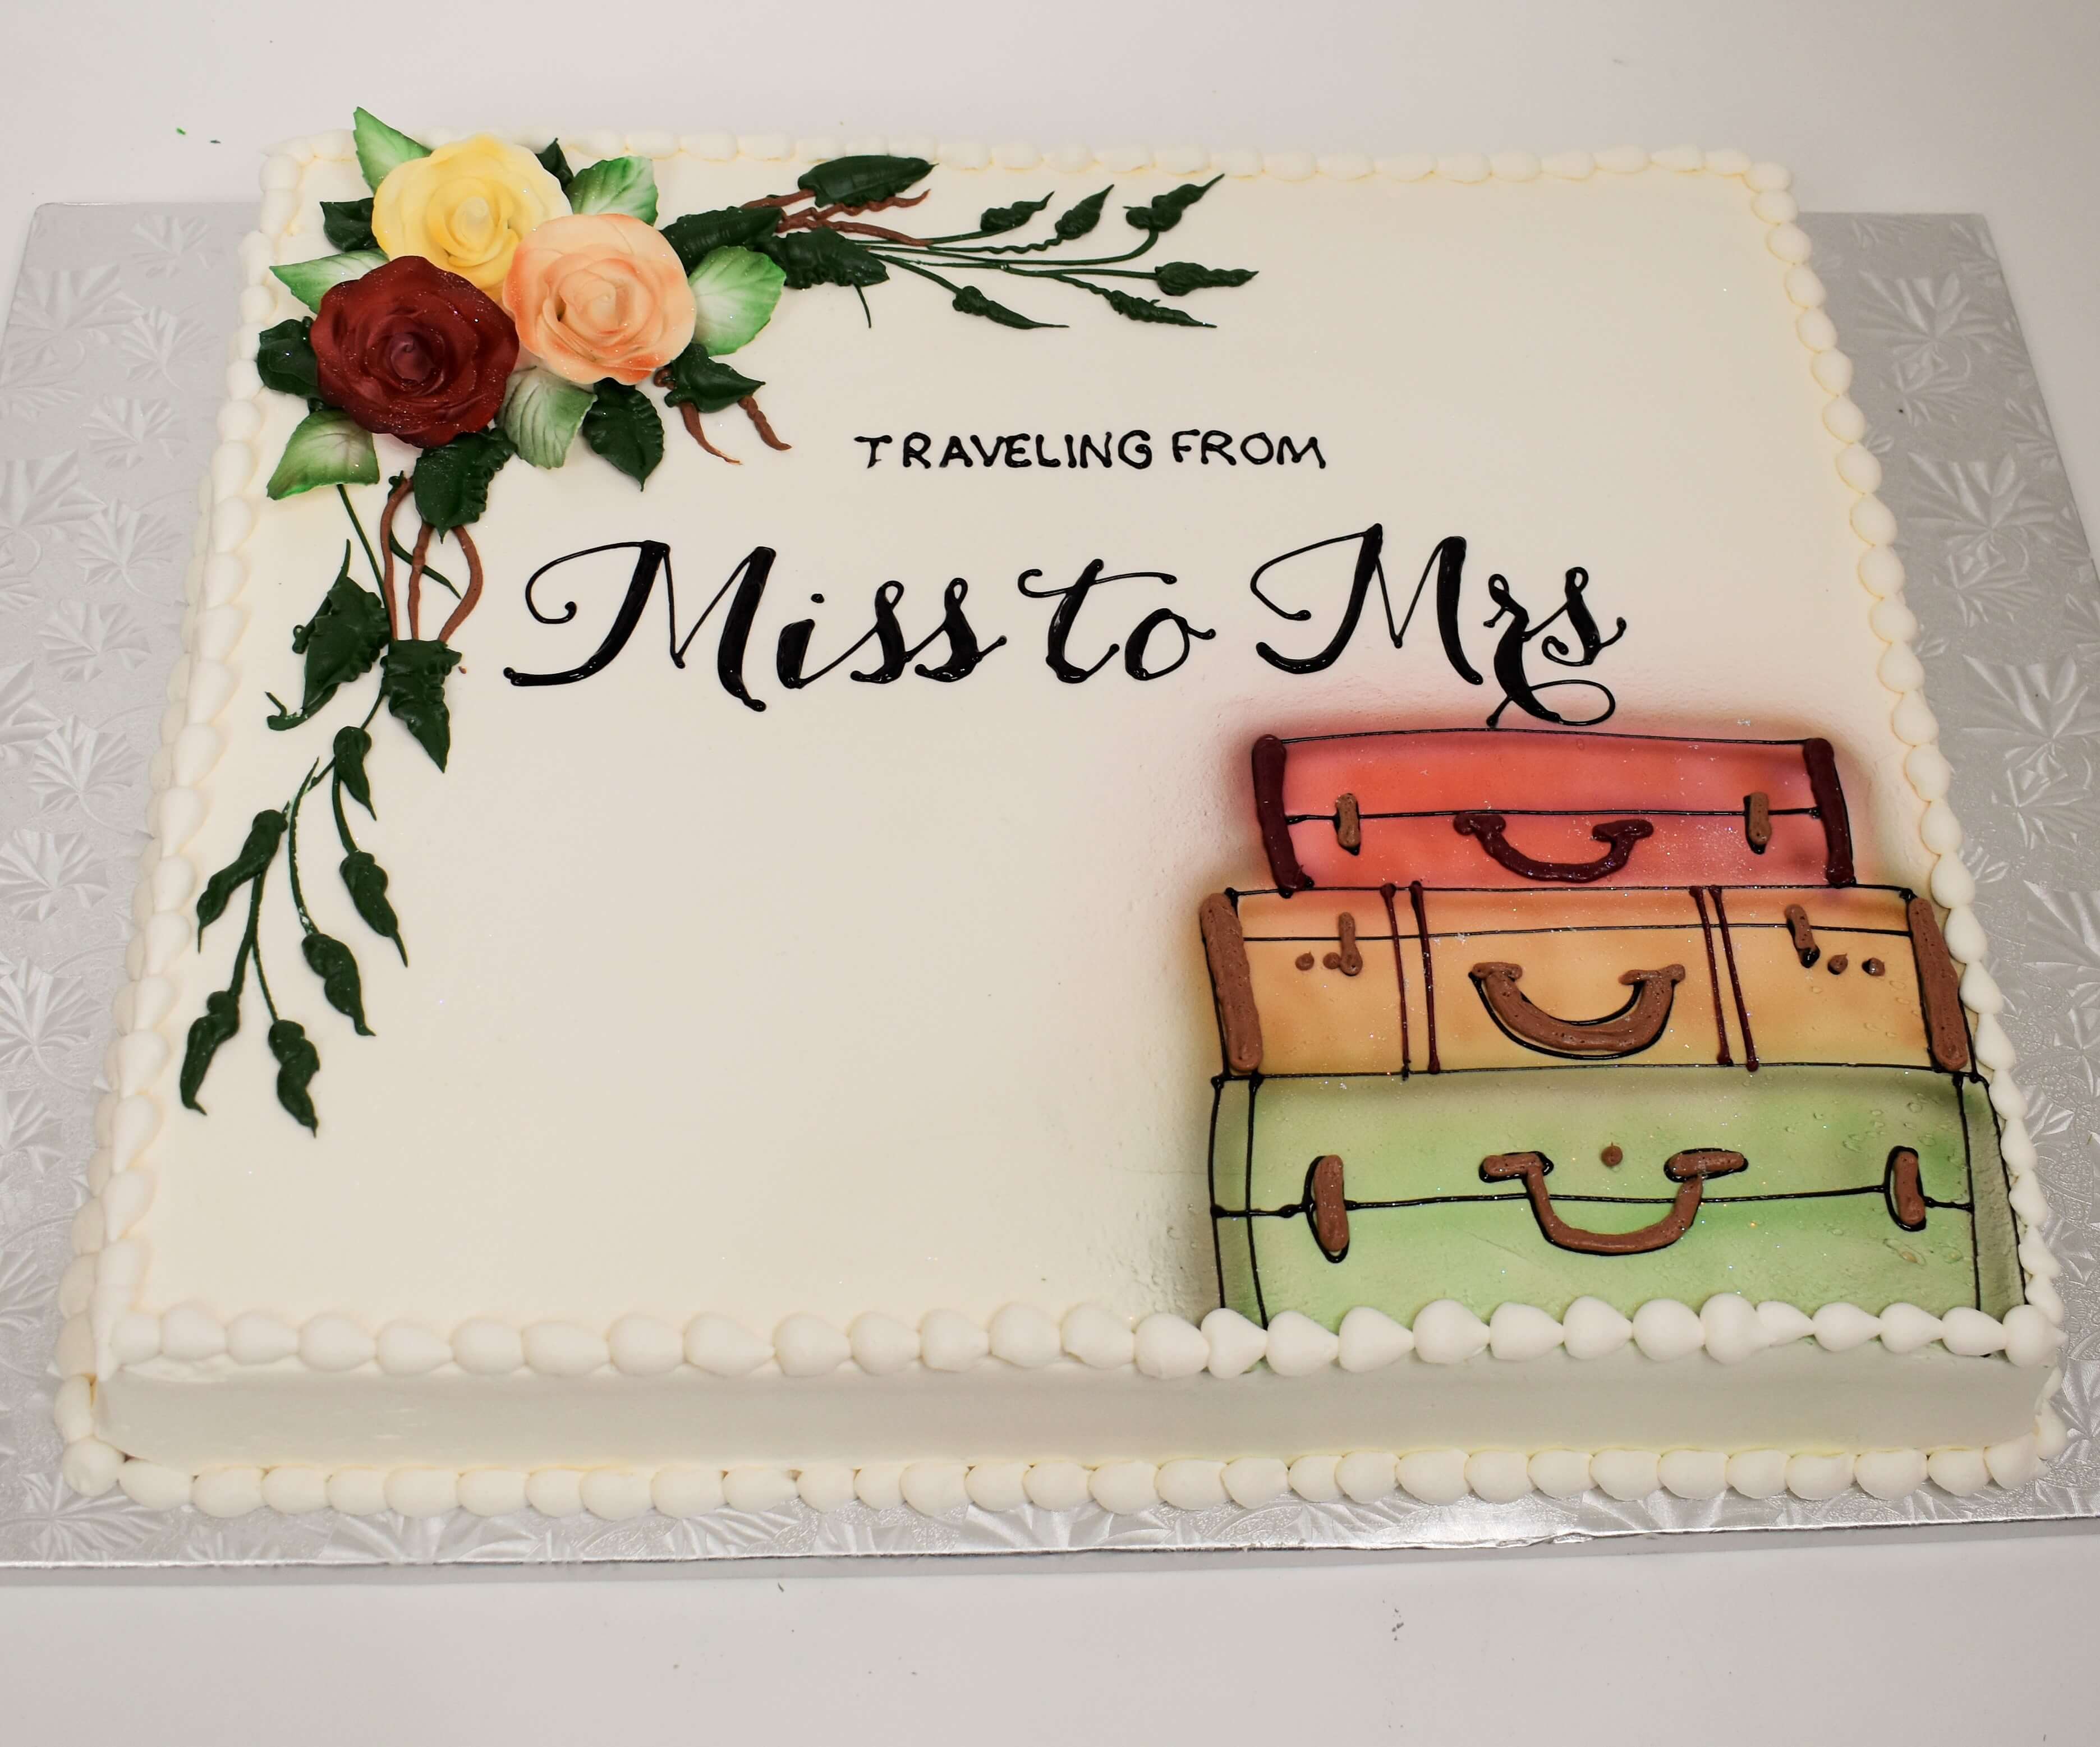 MaArthur's Bakery Custom Cake with Mr. & Mrs. with Suitcases and Roses